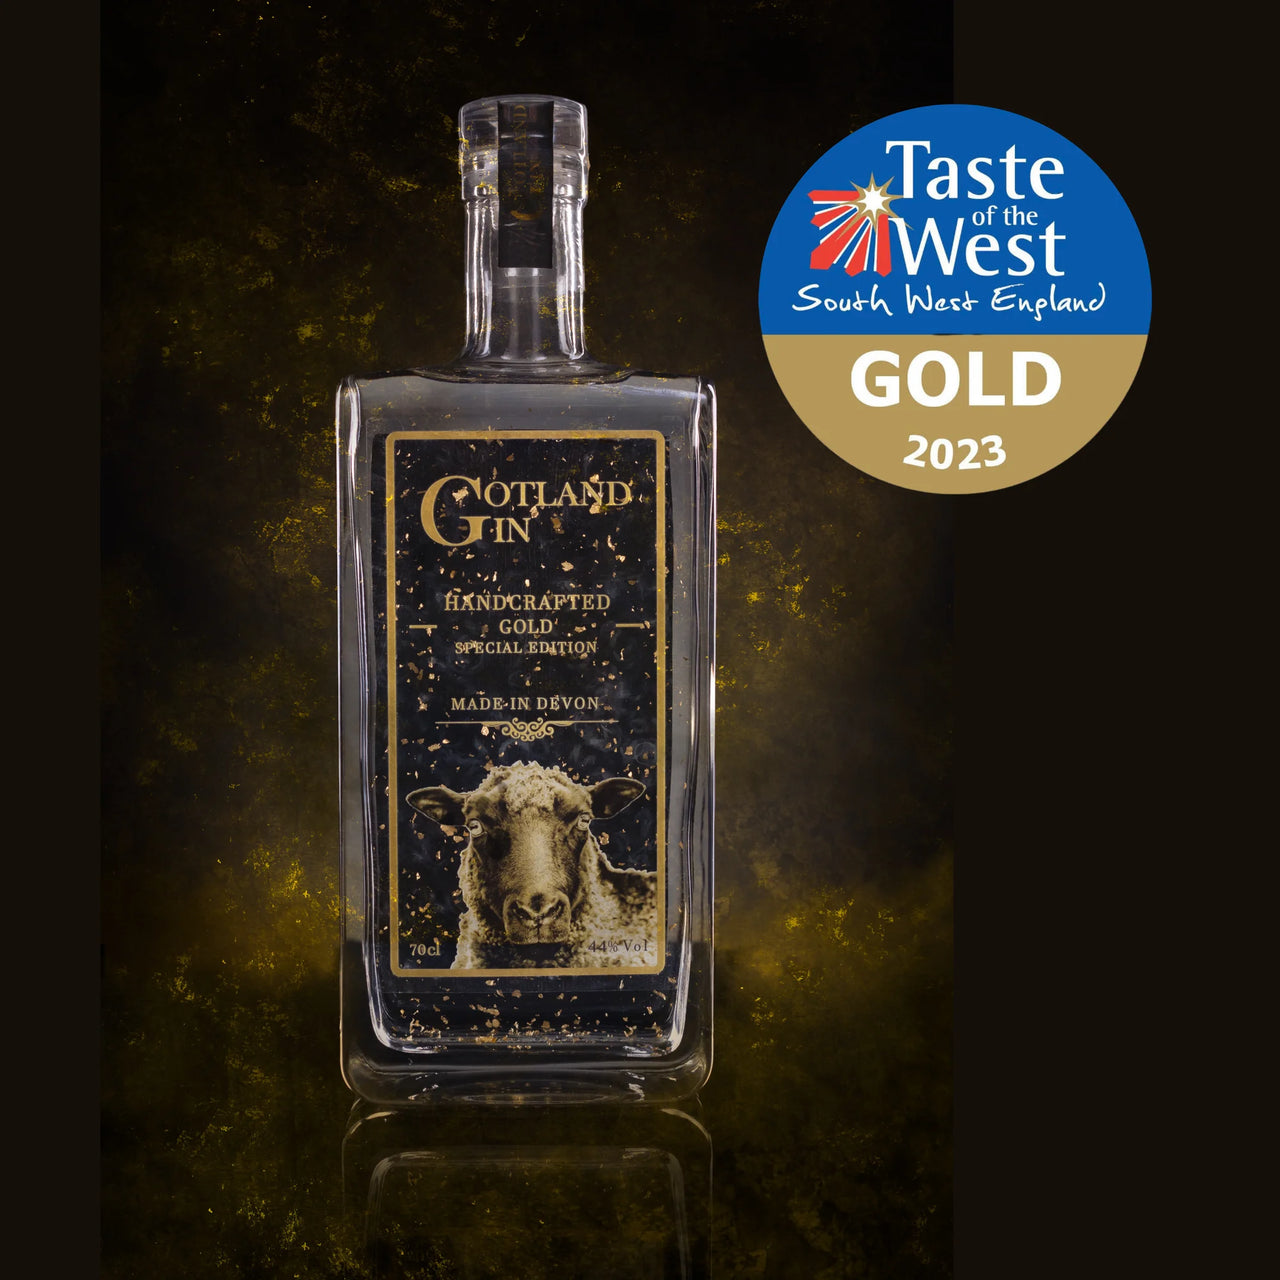 Gotland Gin Handcrafted Gold Special Edition 70cl 44%